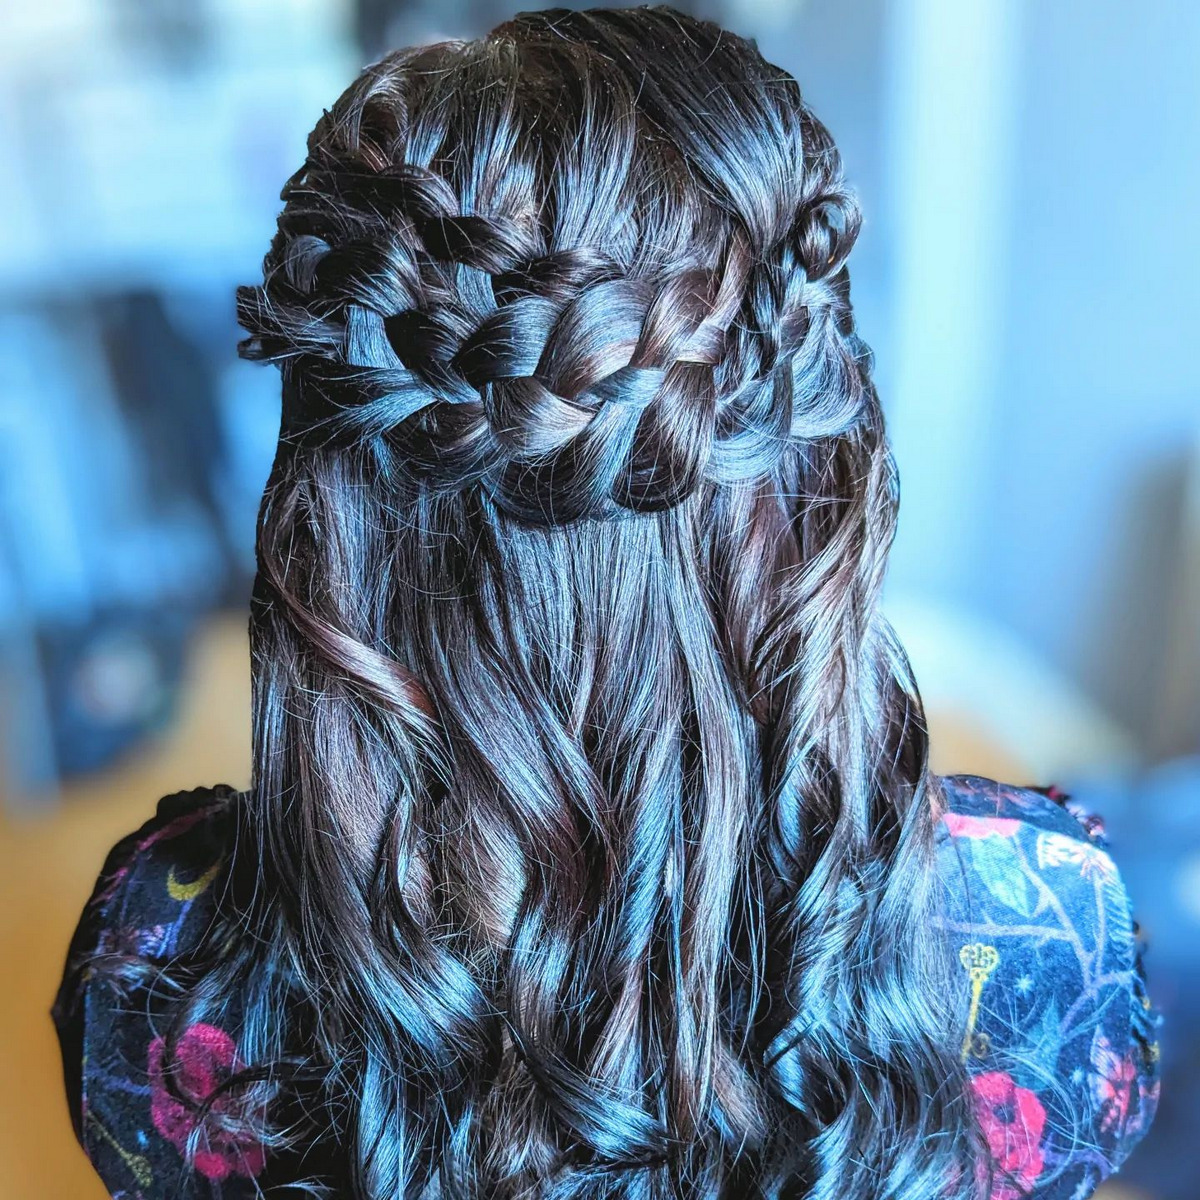 The Braided Crown 